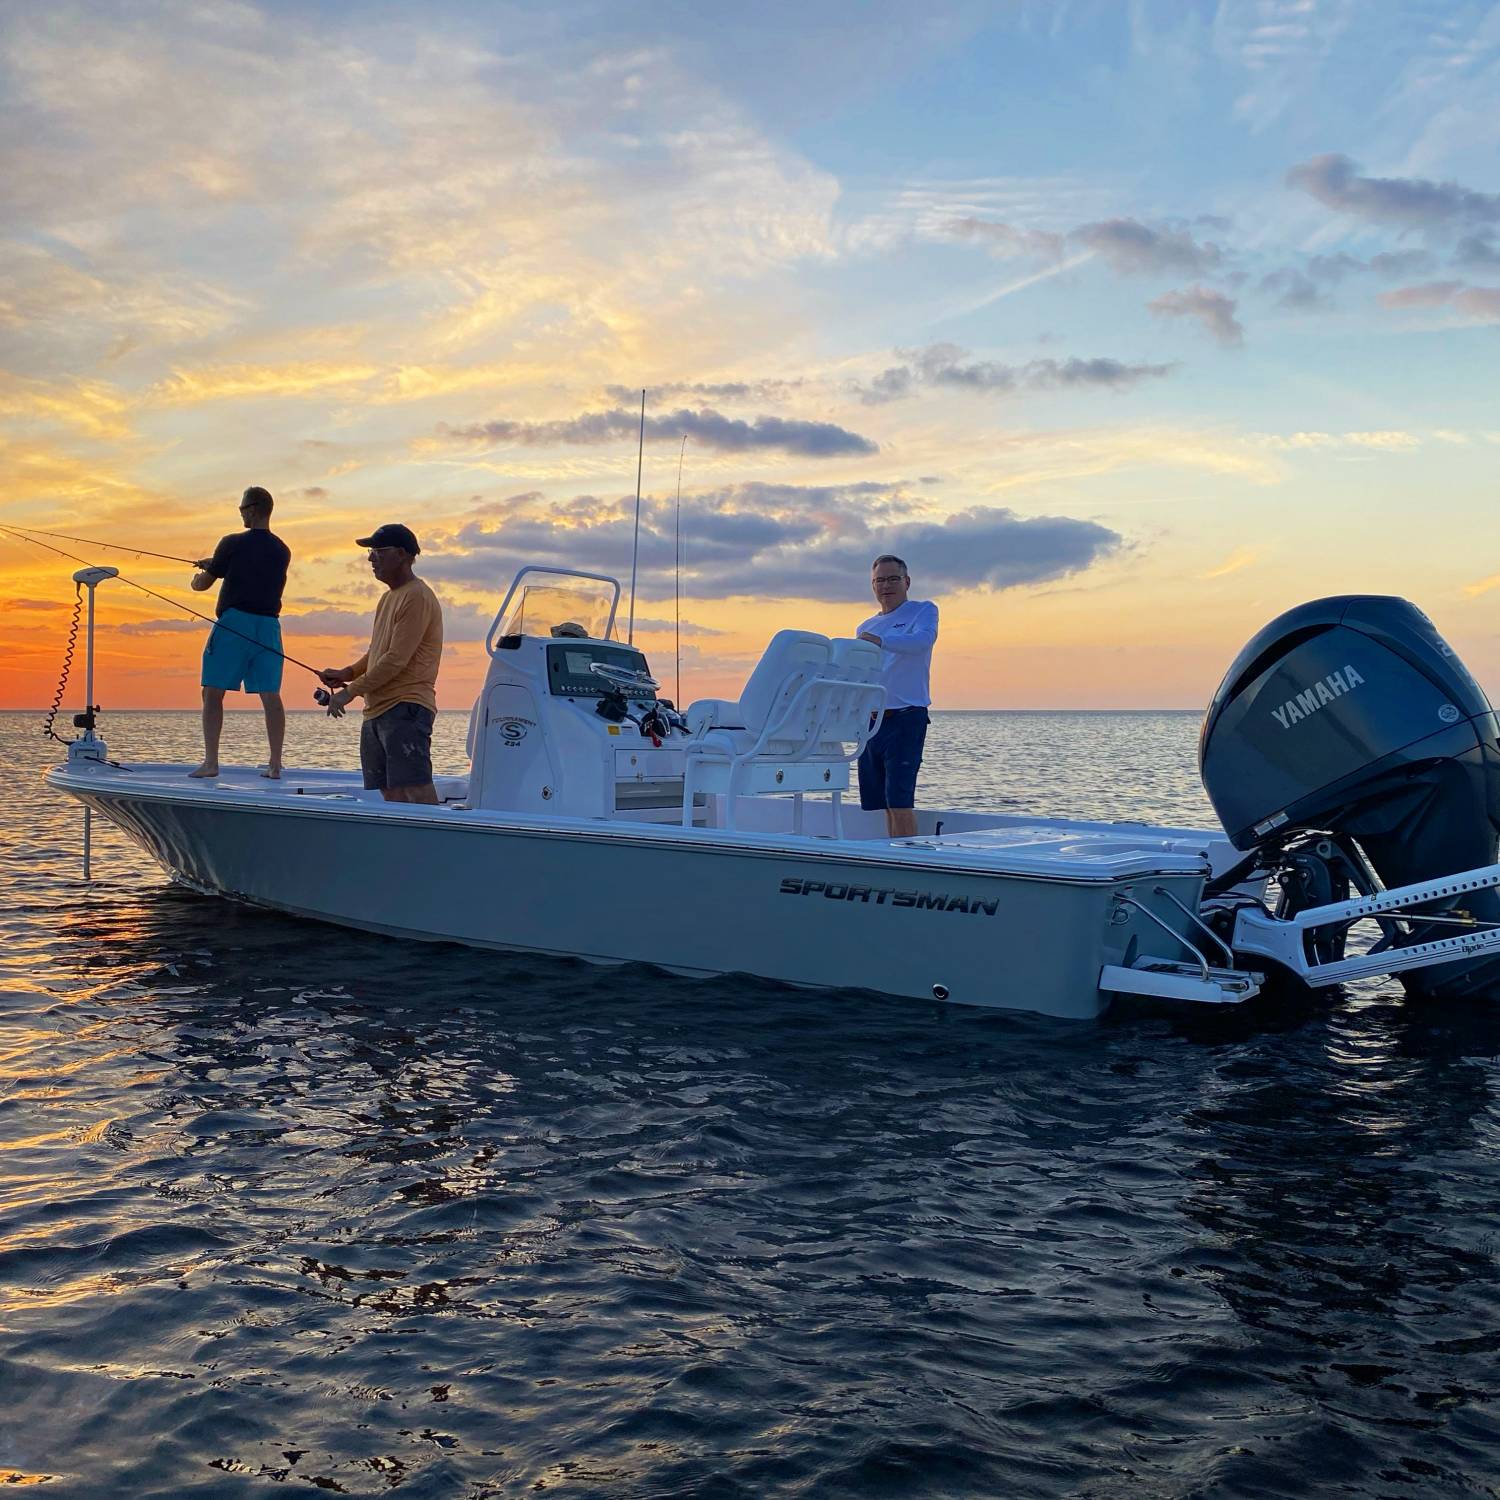 Title: One more cast - On board their Sportsman Tournament 234 Bay Boat - Location: Port Richey, FL  USA. Participating in the Photo Contest #SportsmanFebruary2022